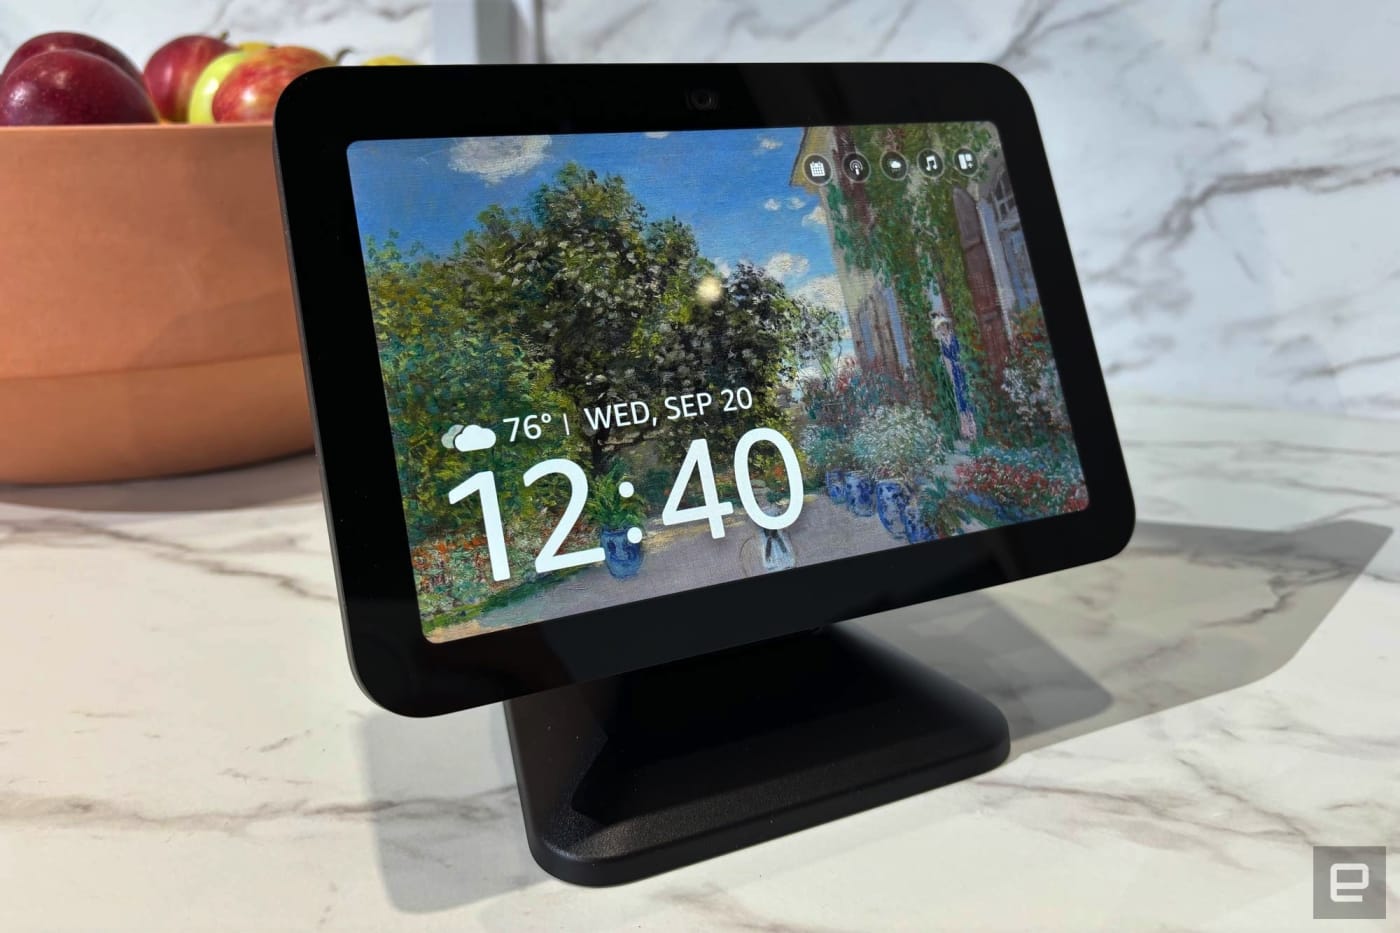 The latest Amazon Echo Show 8 returns to an all-time low of $90